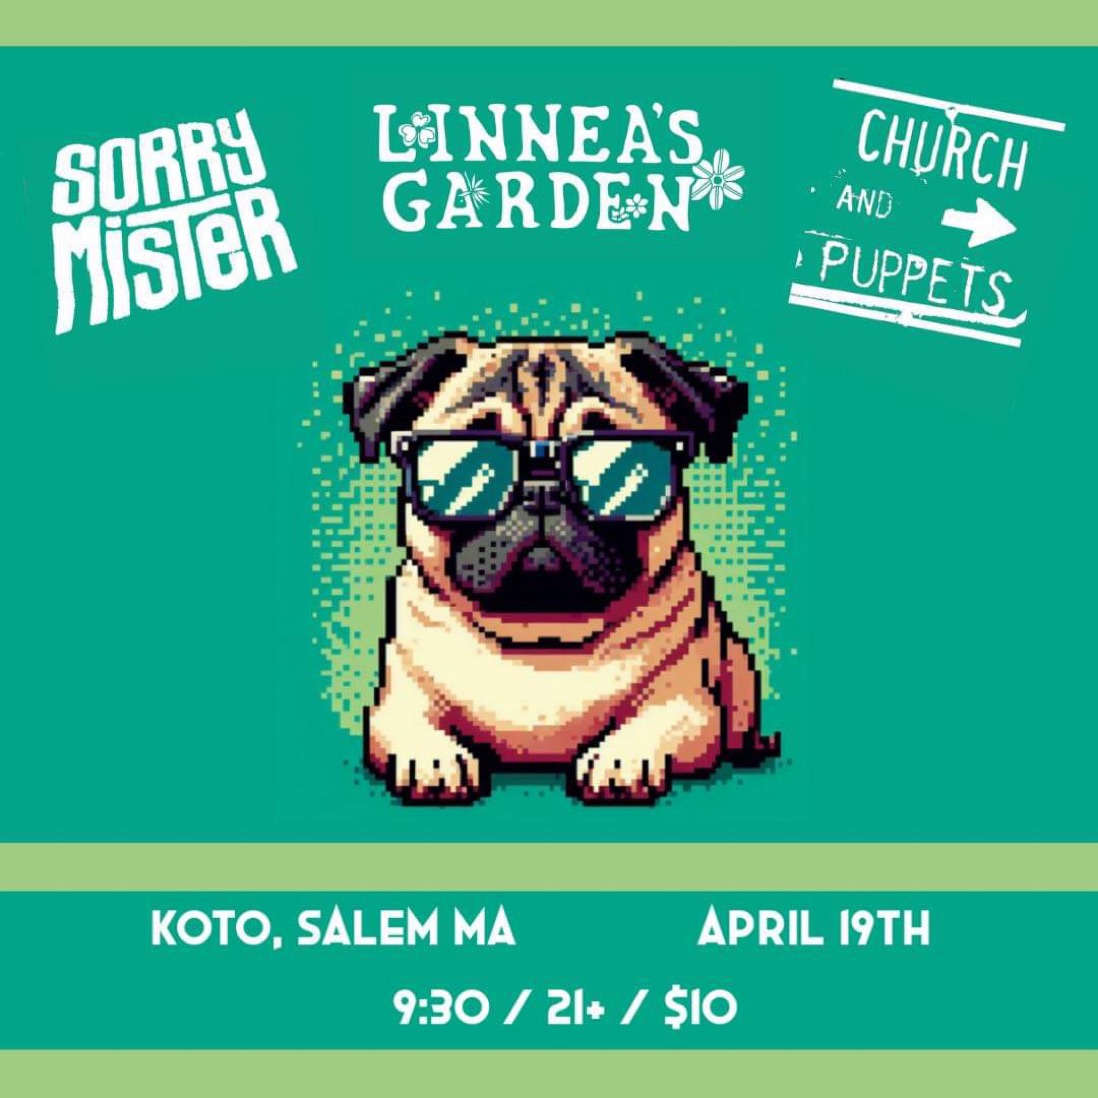 Experience an extraordinary music event at Koto, Salem MA on April 19th! Join us for electrifying performances from bands like Sorry Mister, Linnea's Garden, and Church & Puppets. Get drawn in by our unique promotional poster that showcases a one-of-a-kind pixelated pug. Don't miss out on this unforgettable night of fantastic music and great vibes!